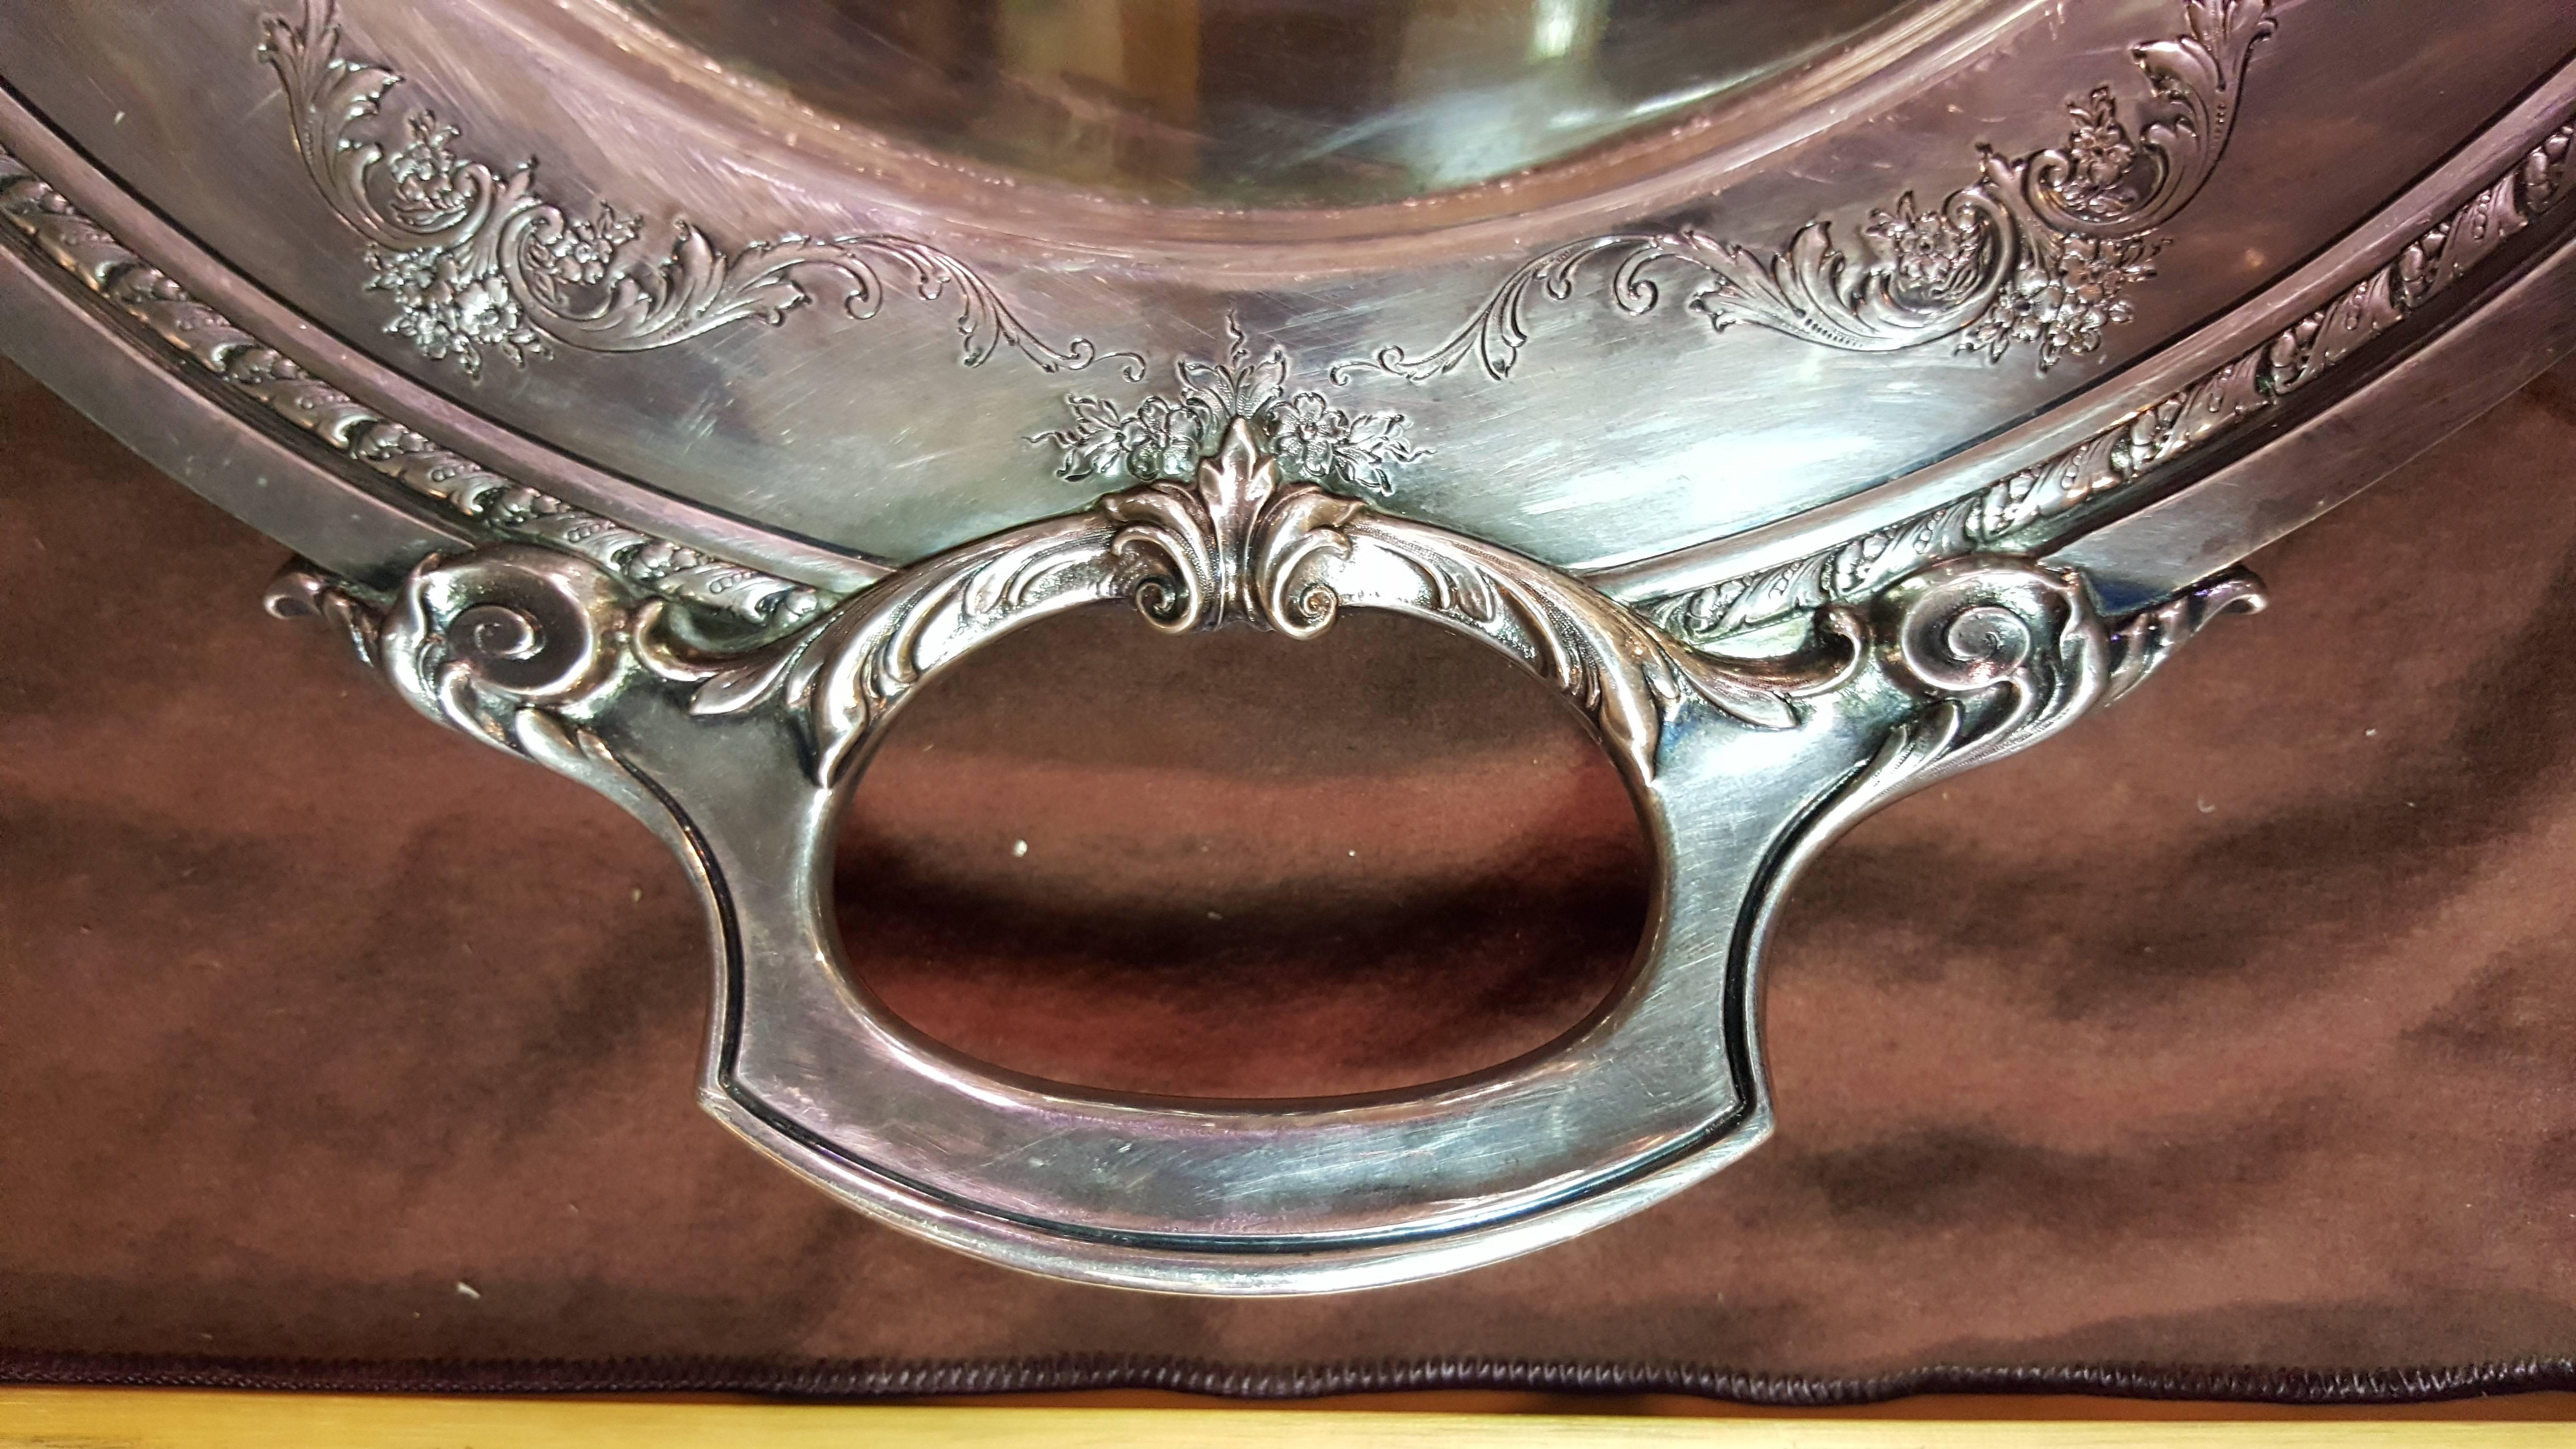 Towle silversmiths "Virginia Lee" six piece sterling silver tea set including handled tray. All pieces marked sterling. Substantial tray measures 28.5" W 19" H. Coffee 10" H, Teapot 7.5" H.